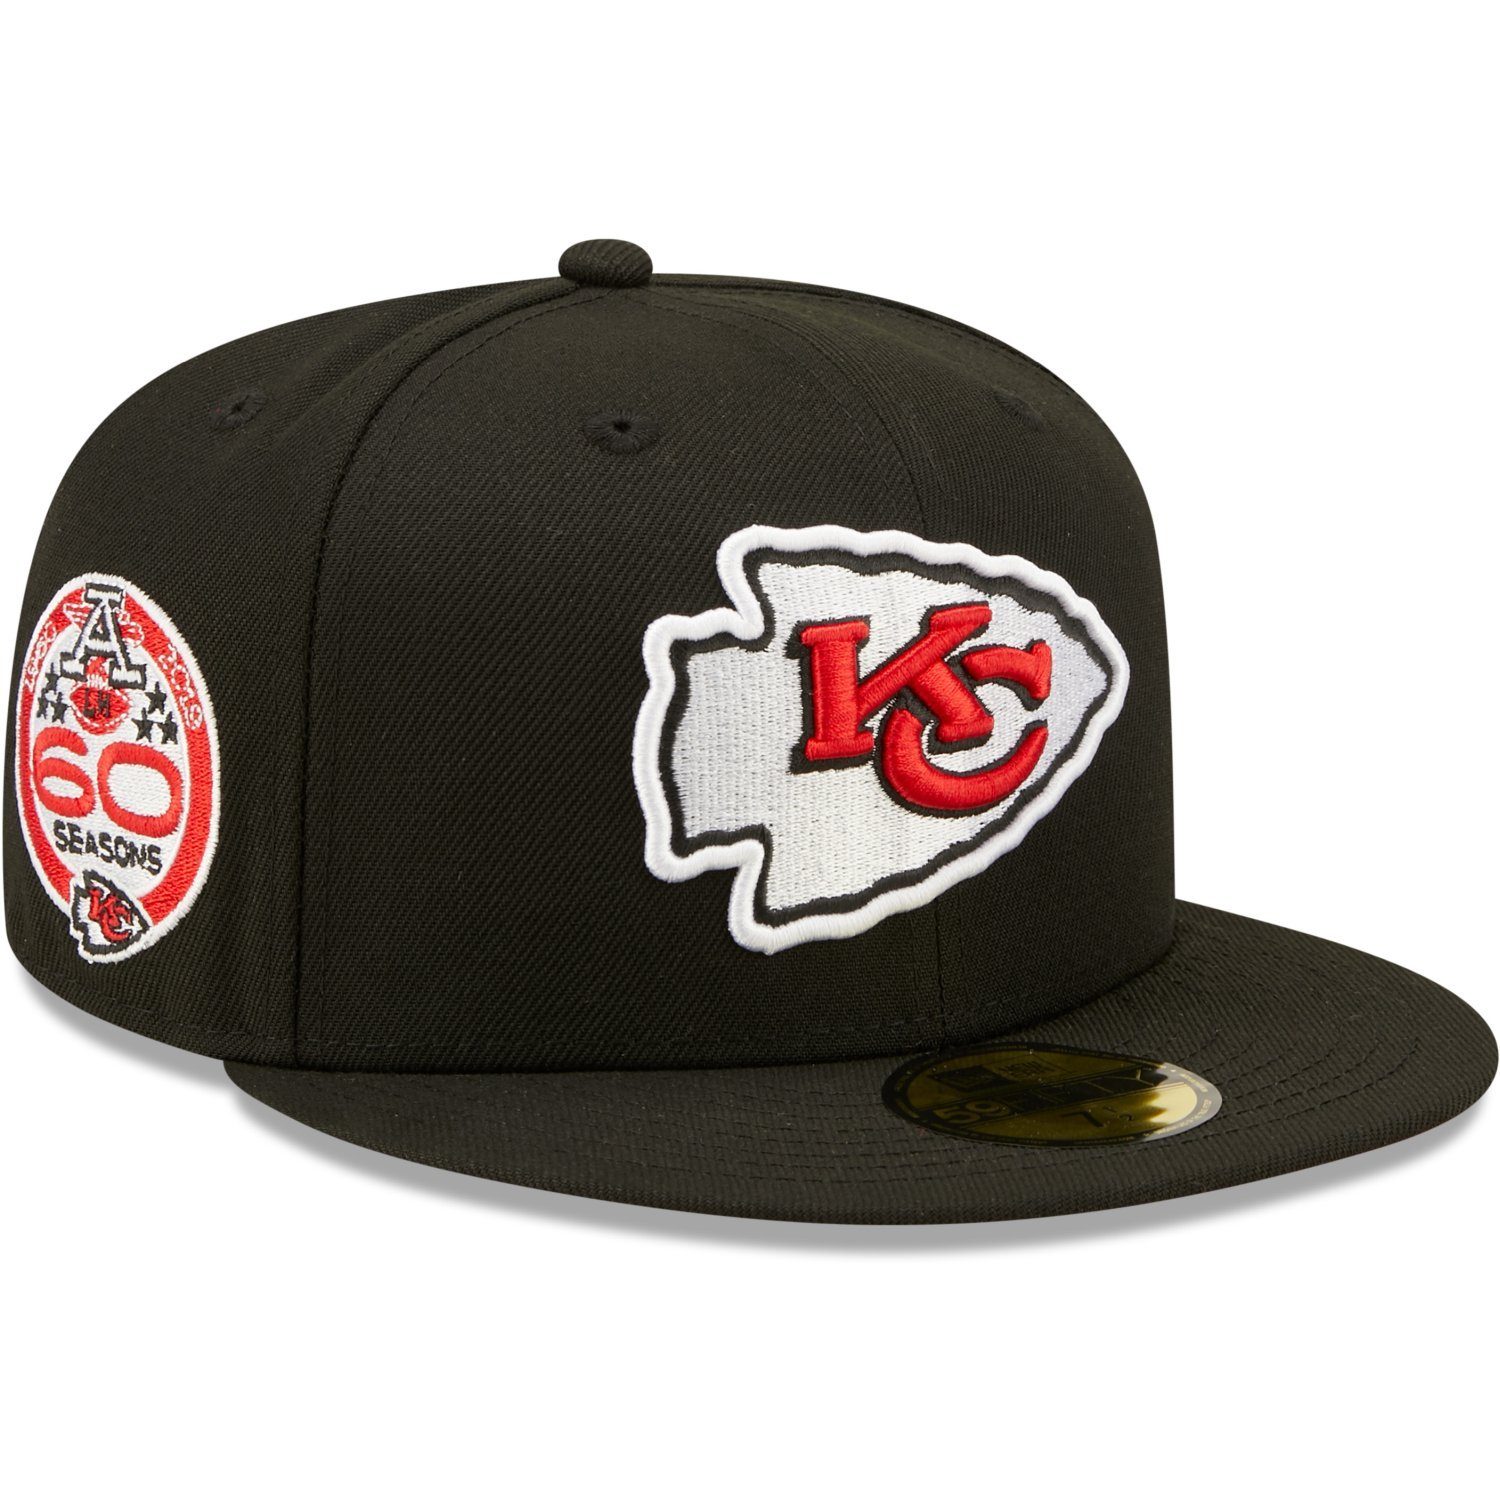 New Era Fitted Cap 59Fifty Kansas City Chiefs 60 Seasons | Fitted Caps